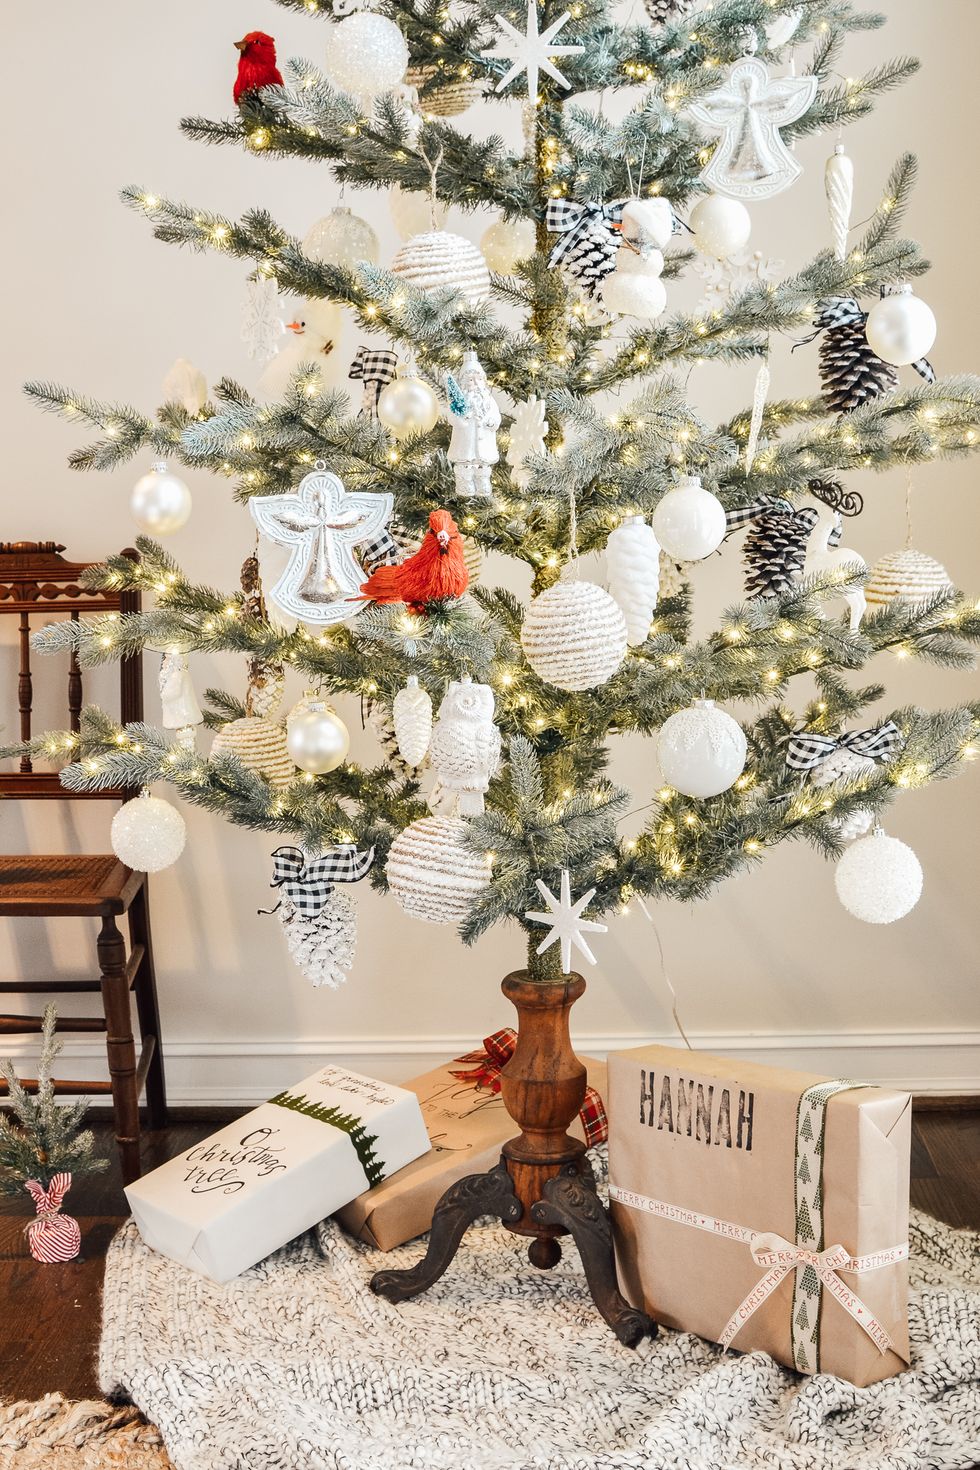 The best Christmas tree stands you can buy this holiday season